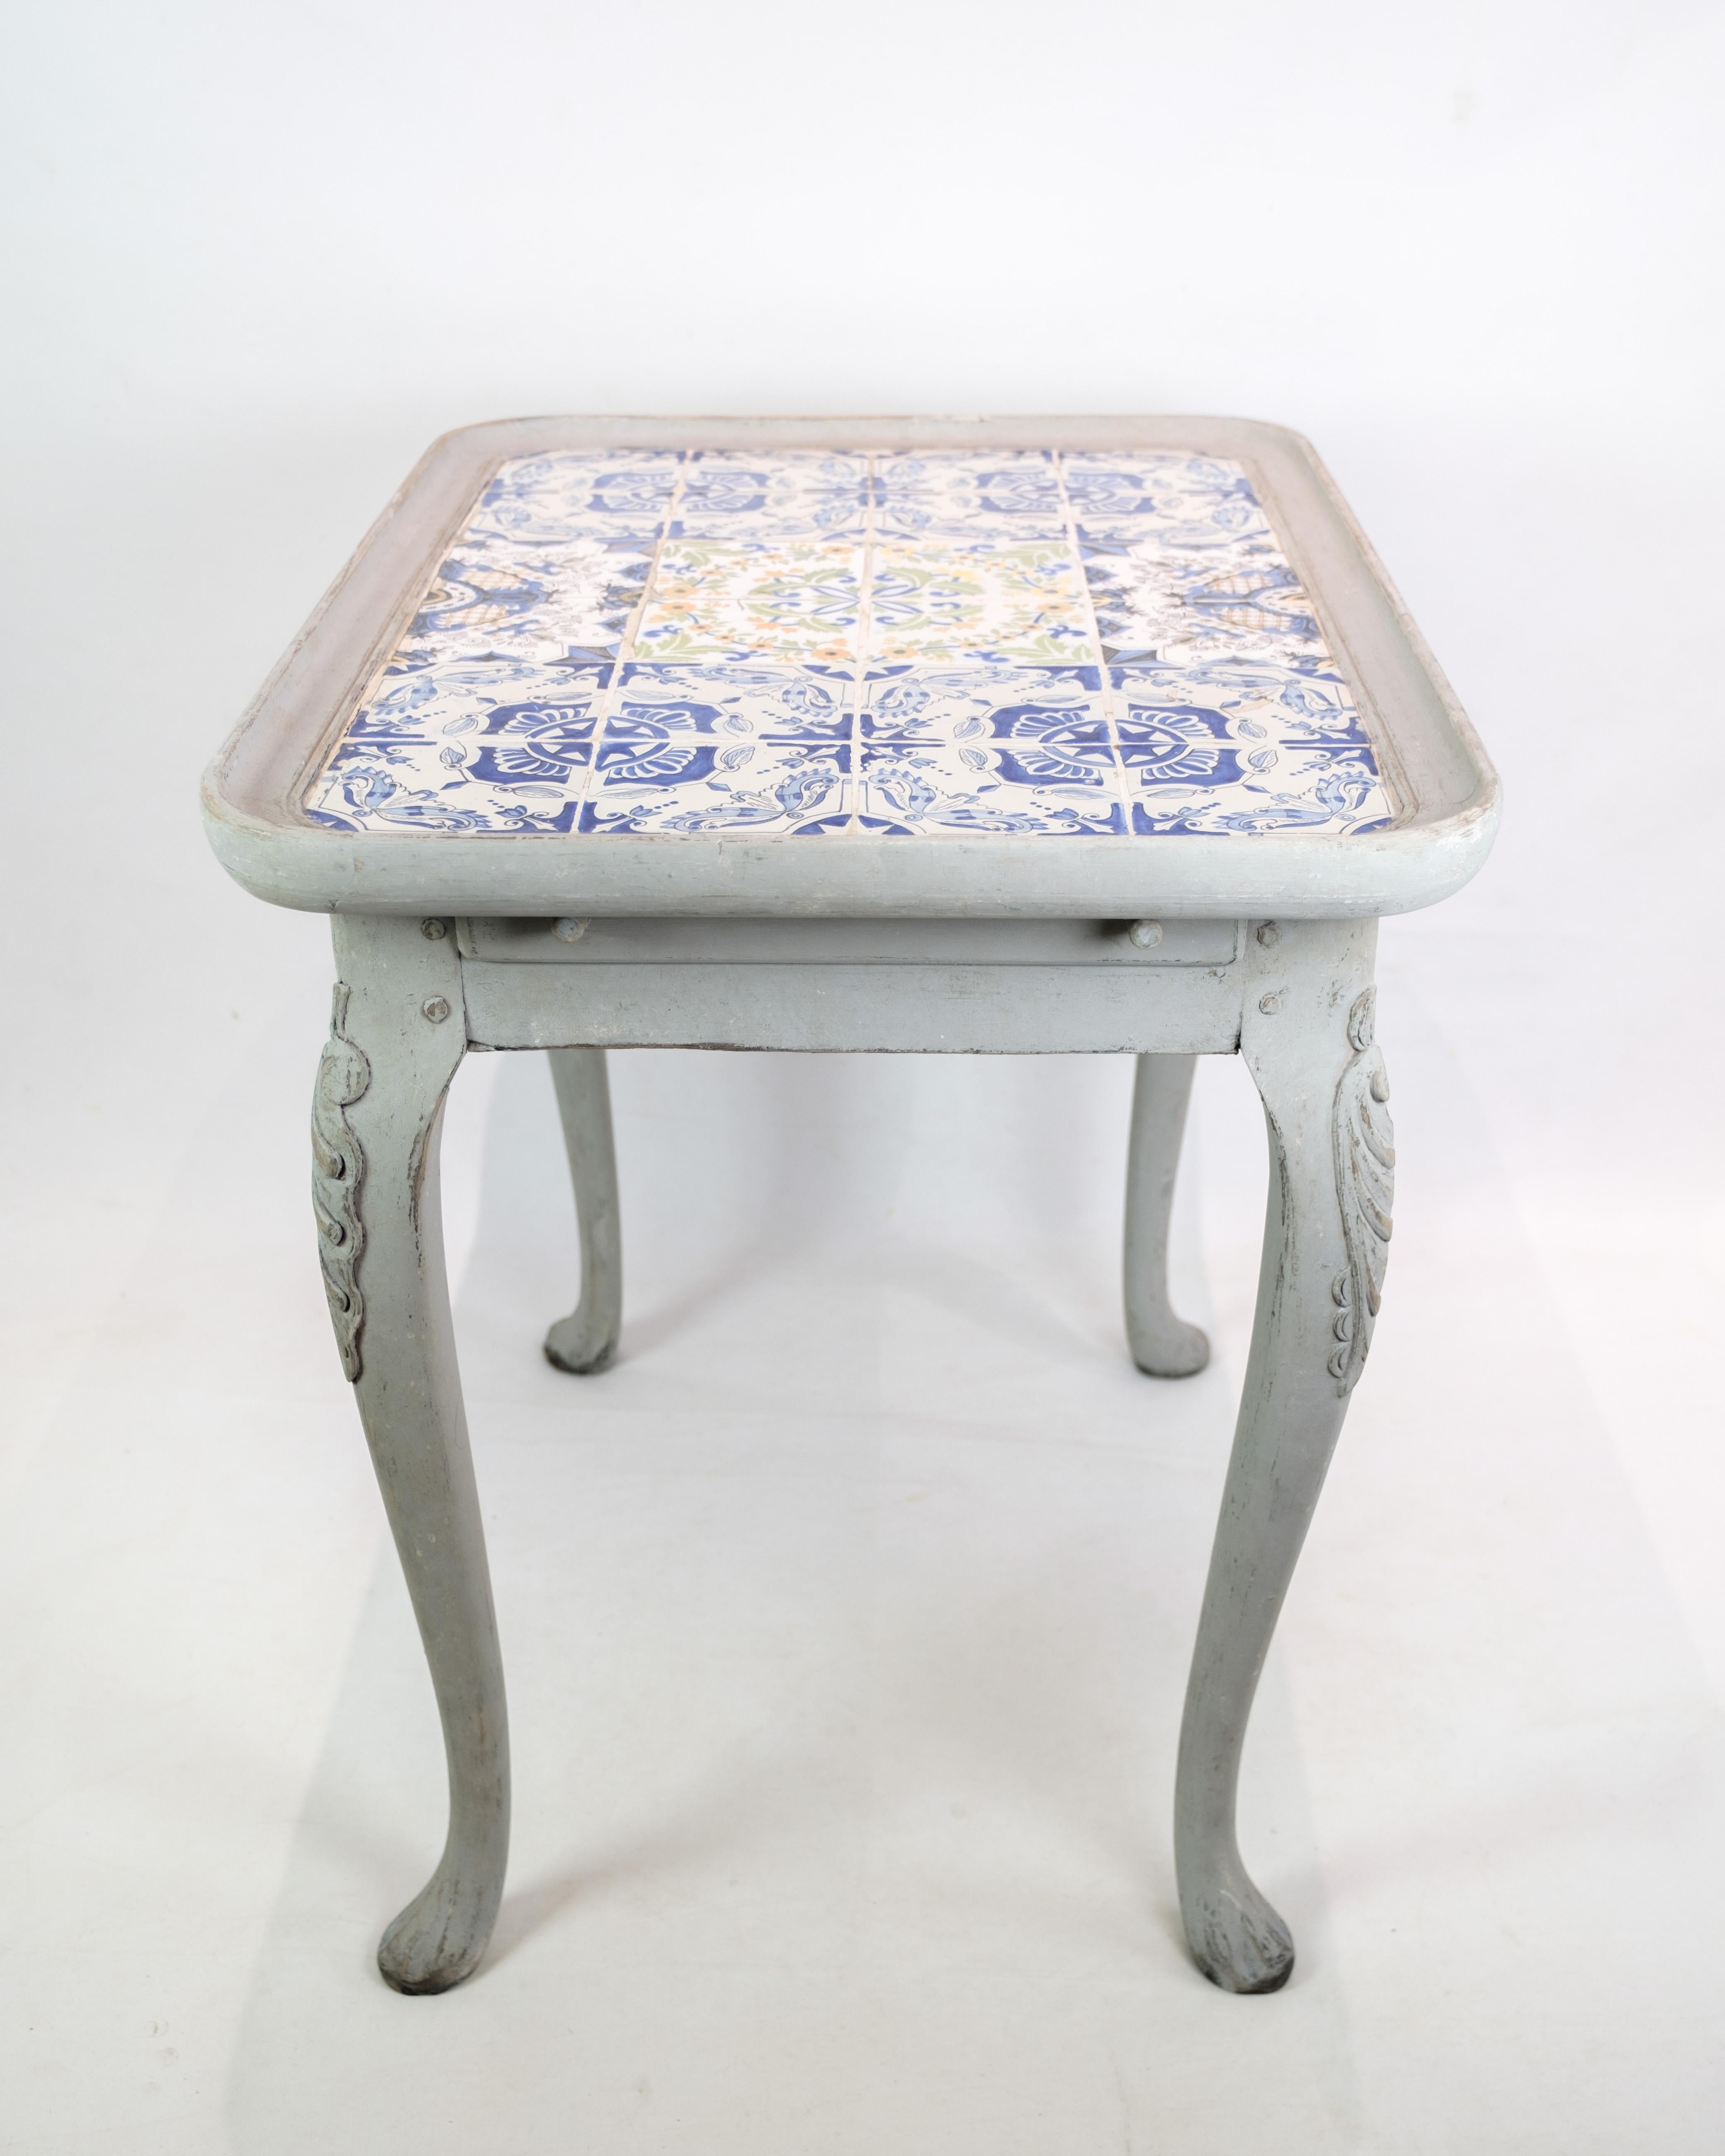 The Rococo Tile Table Painted in Grey From 1780s In Good Condition For Sale In Lejre, DK